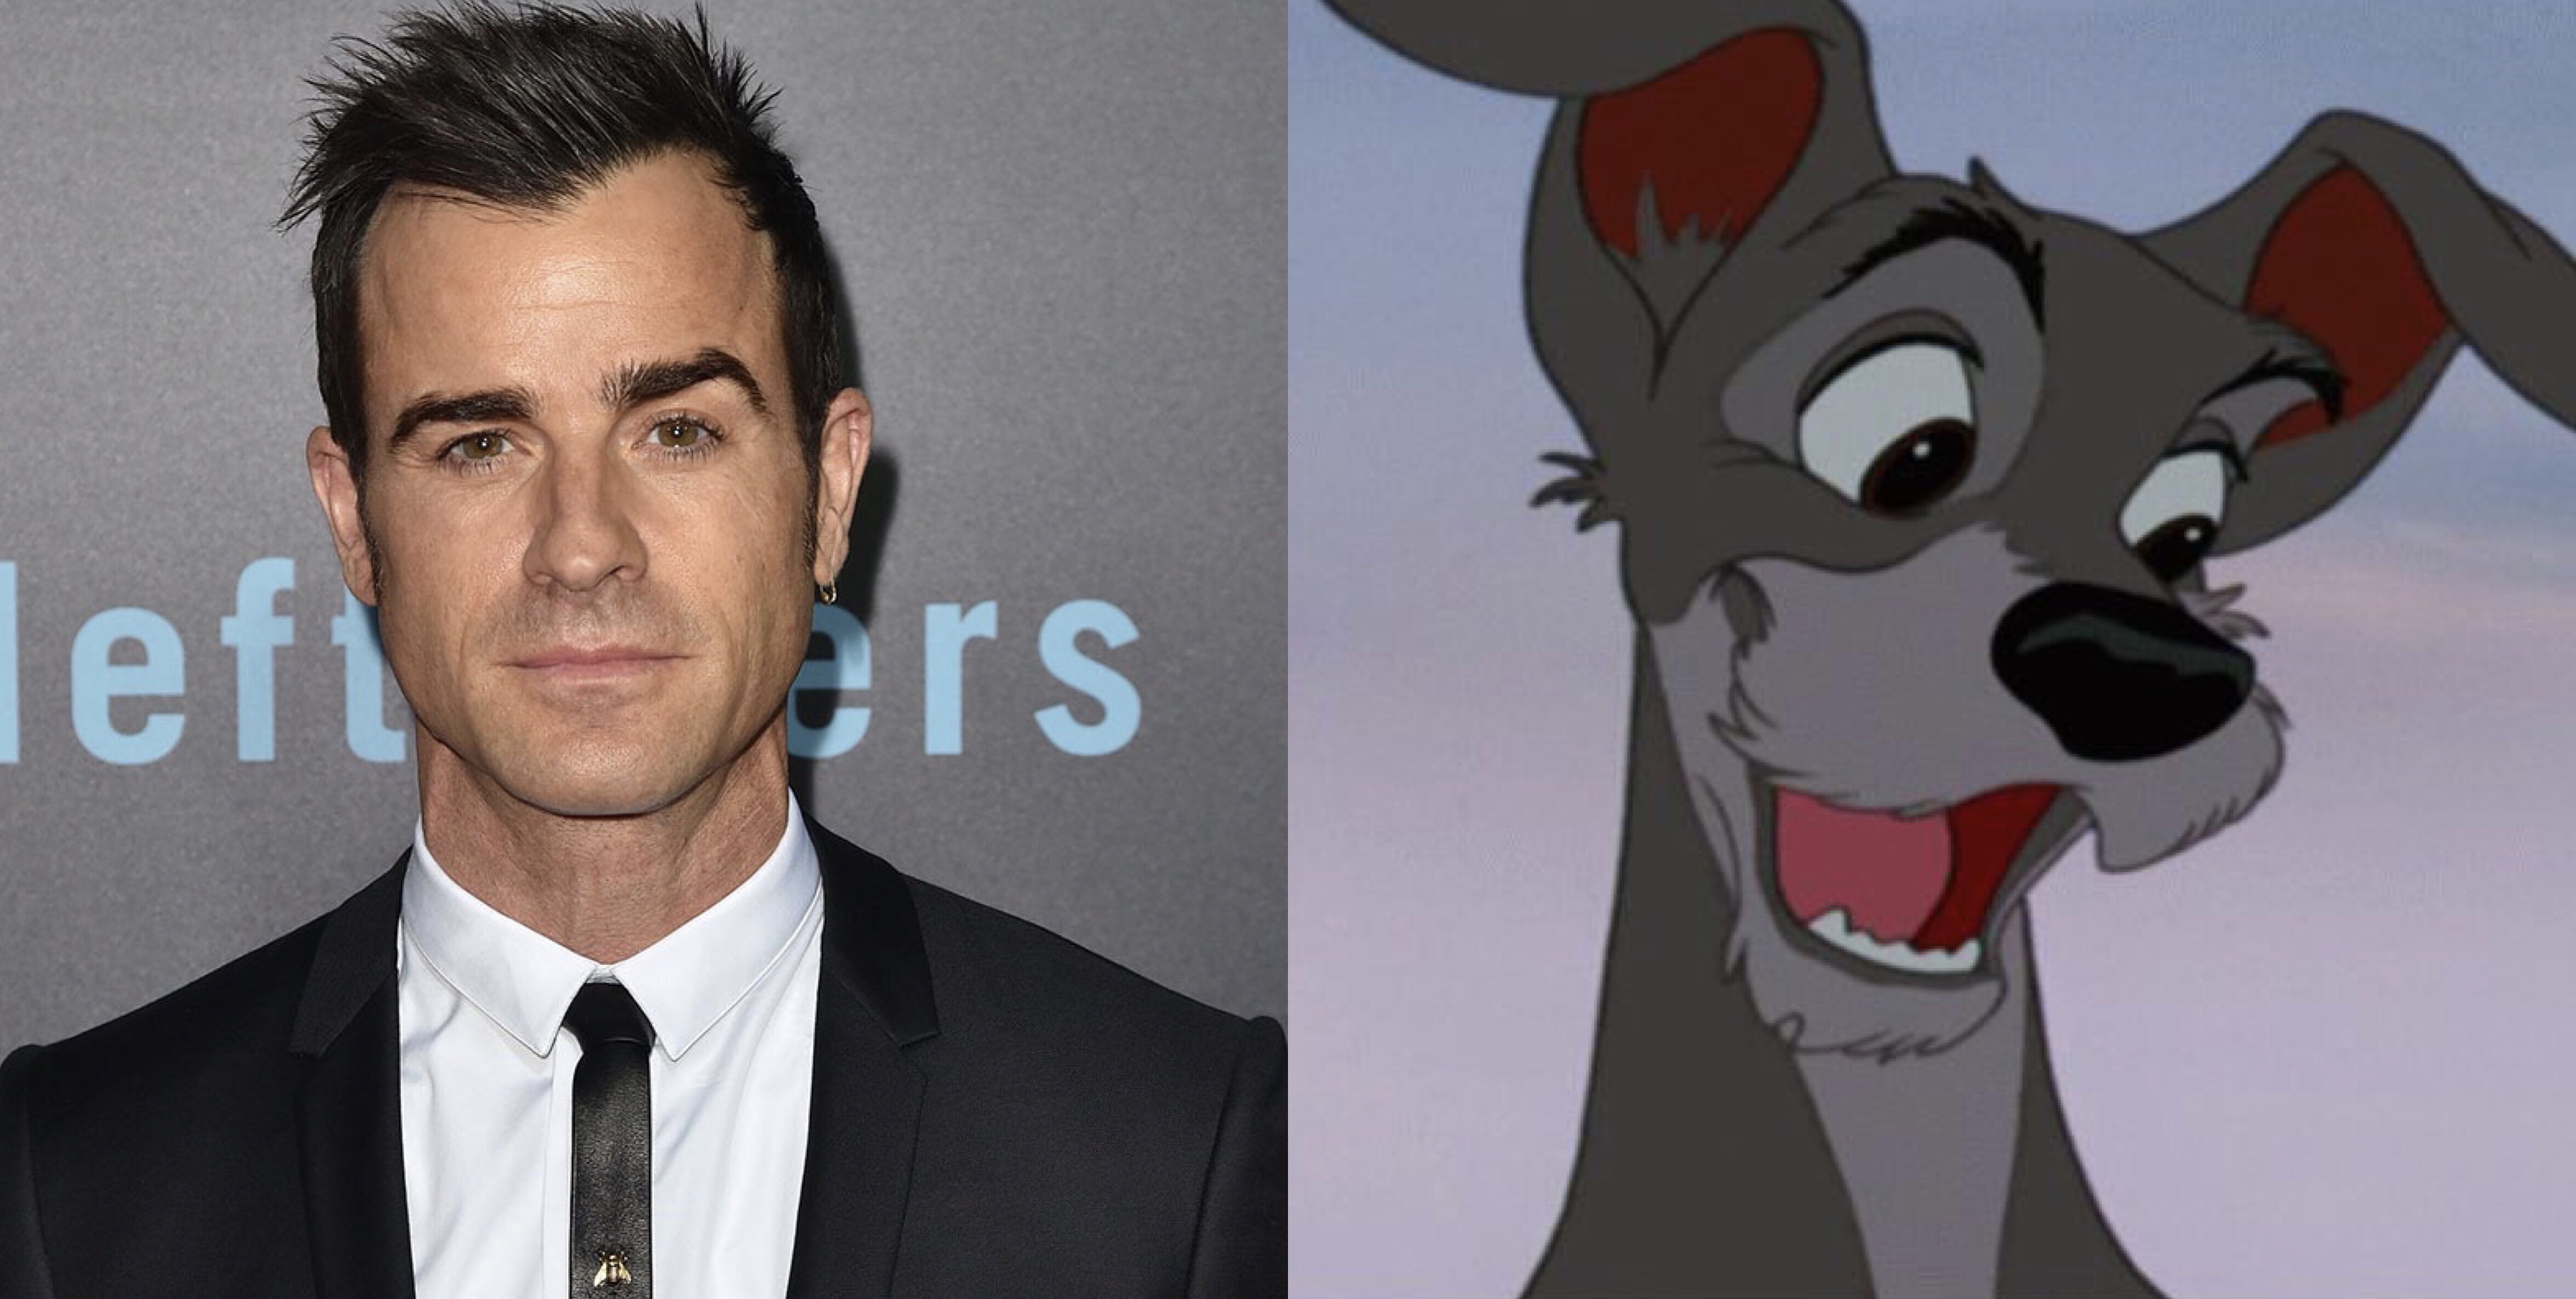 Justin Theroux To Voice Tramp In Disney’s Live-Action ‘Lady and the Tramp’